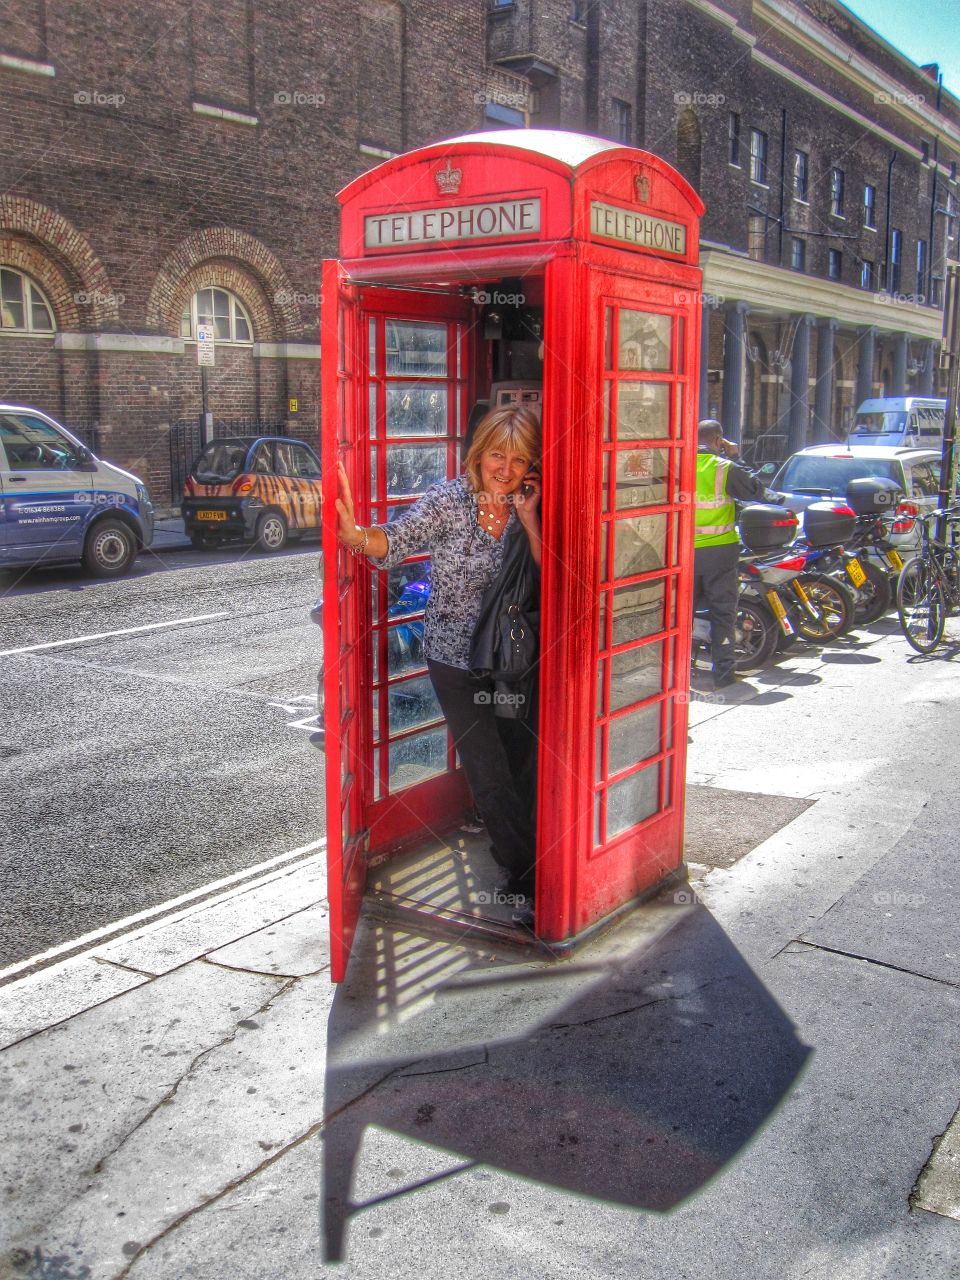 Mature woman speaking on mobile phone in telephone booth